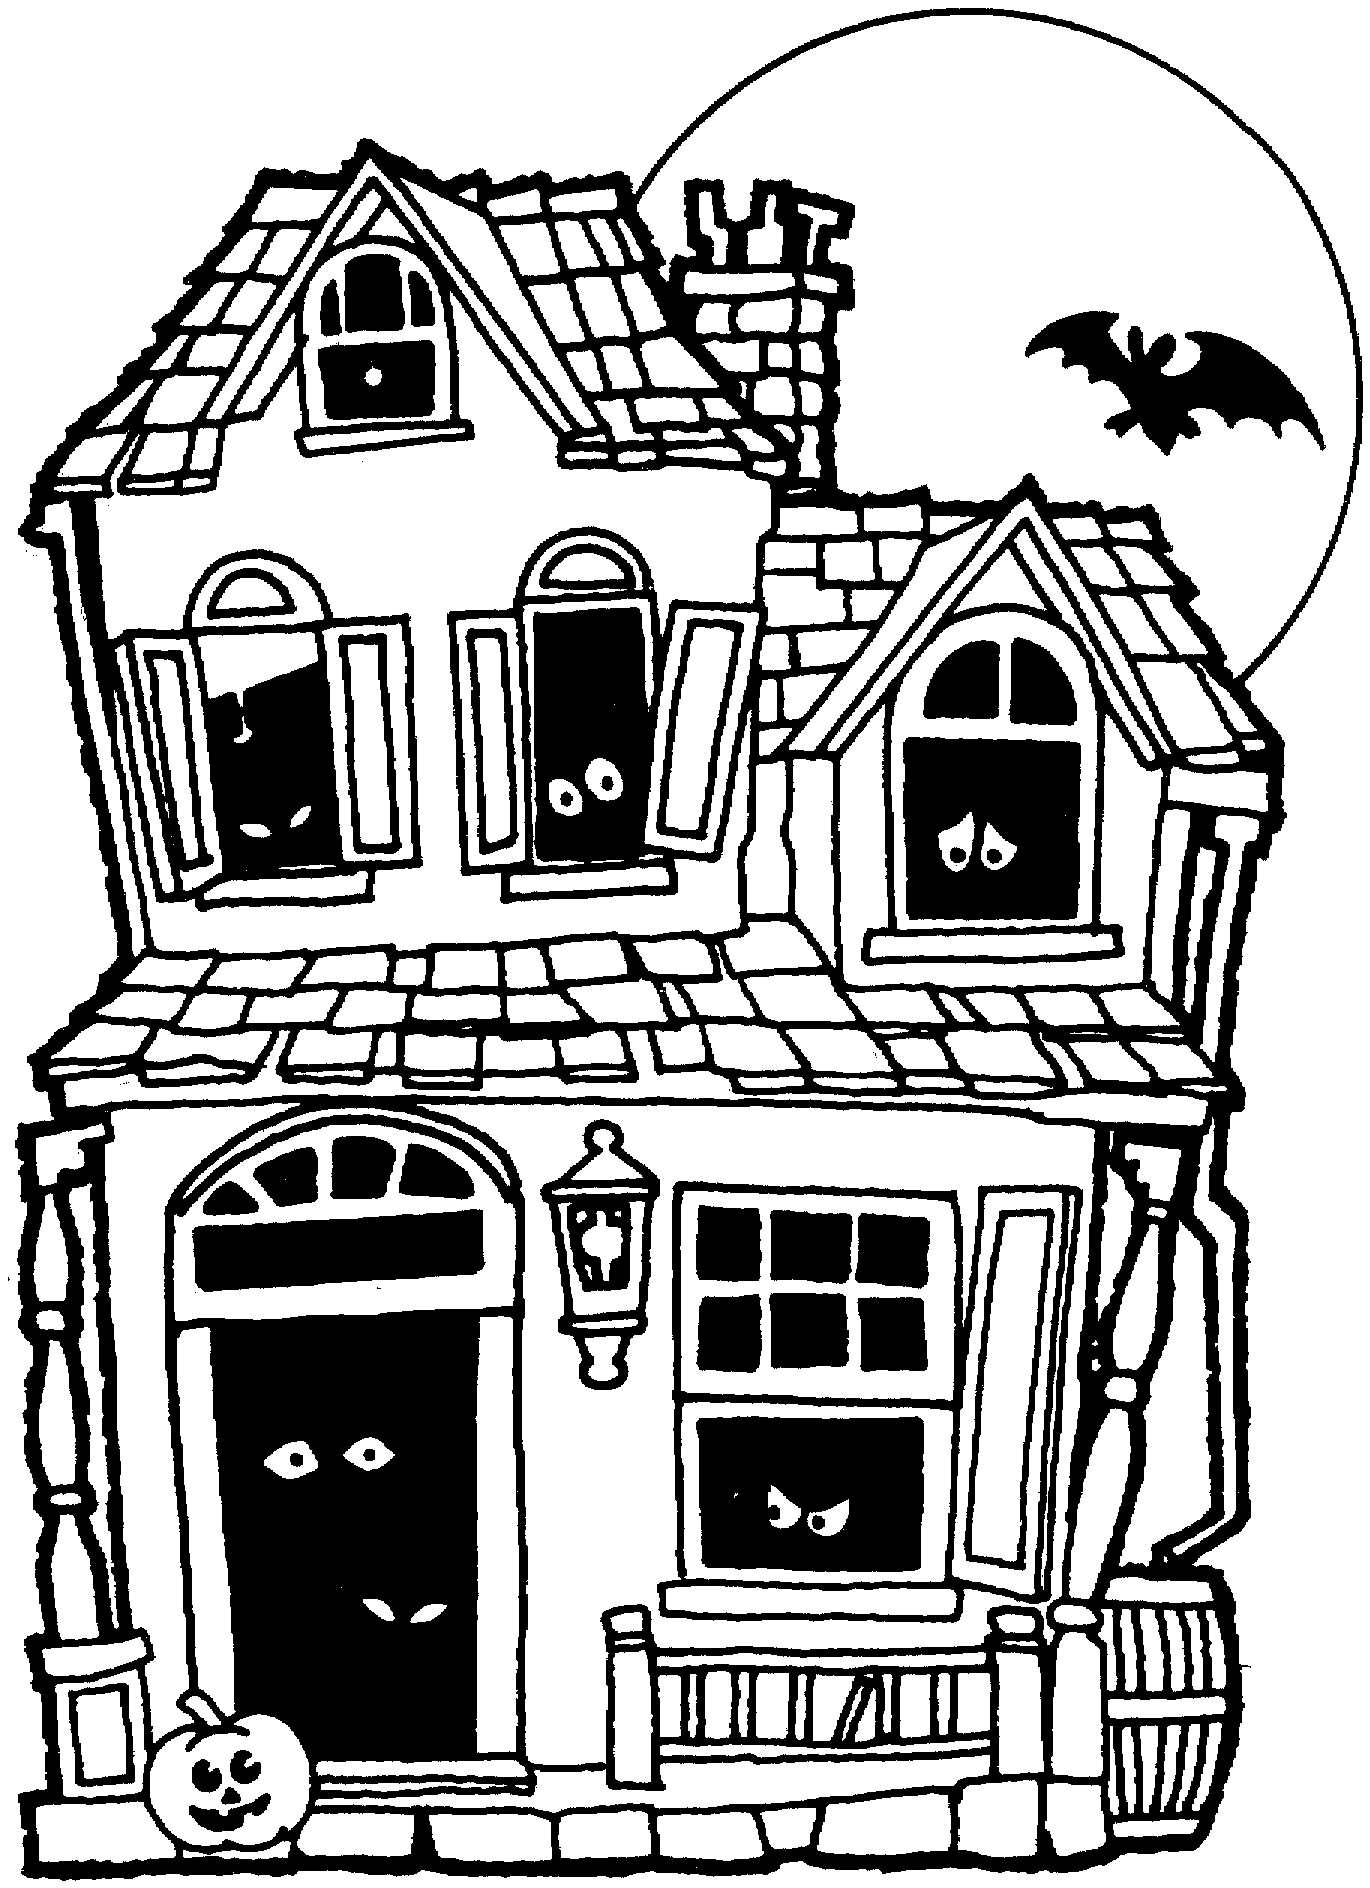 Haunted house clip art black and white | Halloween Wallpapers 2014